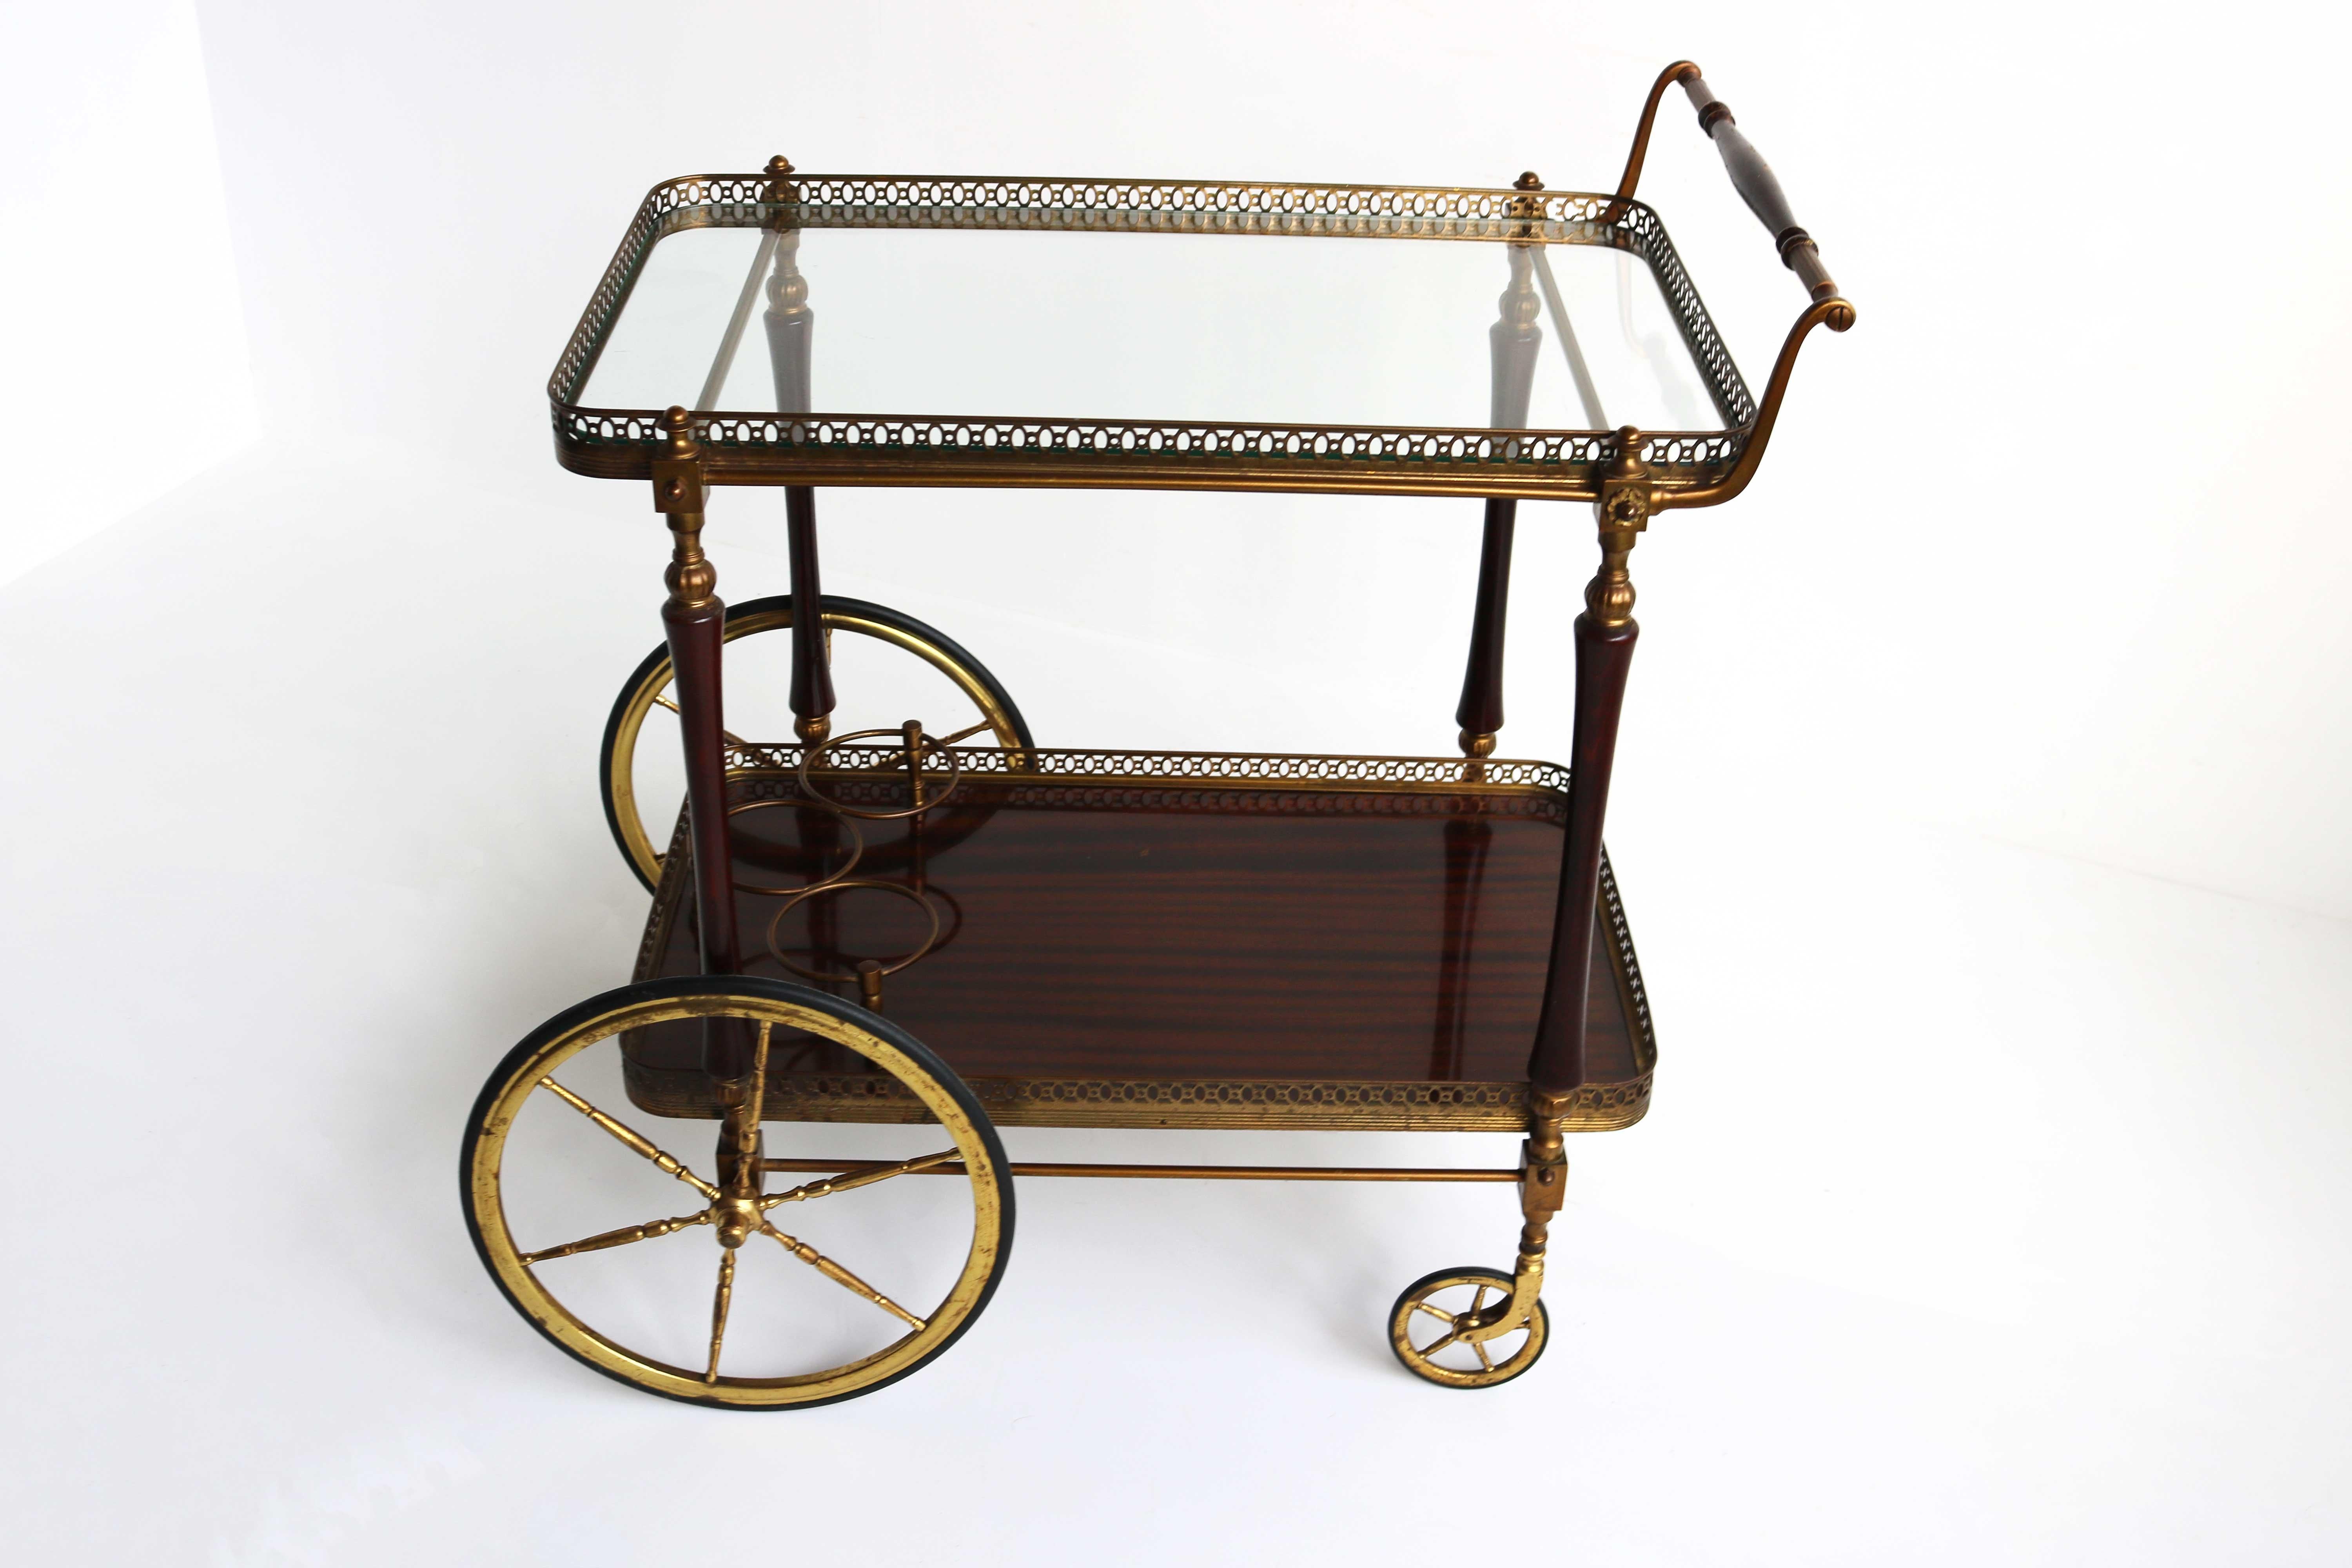 This very elegant neoclassical style bar cart is made of brass , glass and mahogany . 
This is a work by famous French designer Maison Jansen, circa 1950.
Great for displaying your bar set, or a wonderful item to roll out with your pastries and